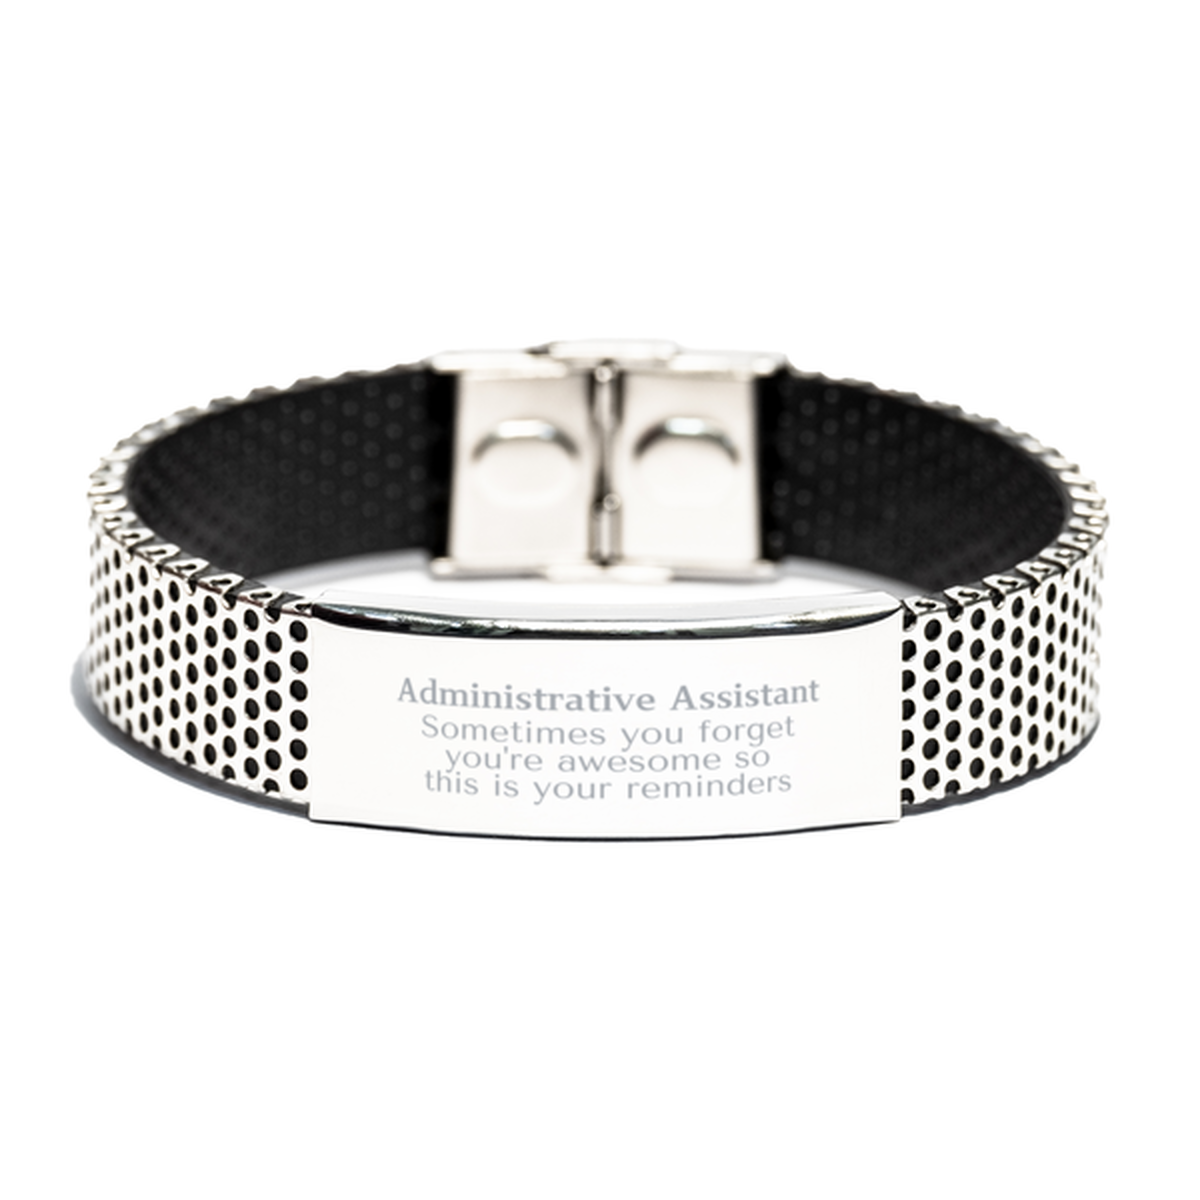 Sentimental Administrative Assistant Stainless Steel Bracelet, Administrative Assistant Sometimes you forget you're awesome so this is your reminders, Graduation Christmas Birthday Gifts for Administrative Assistant, Men, Women, Coworkers